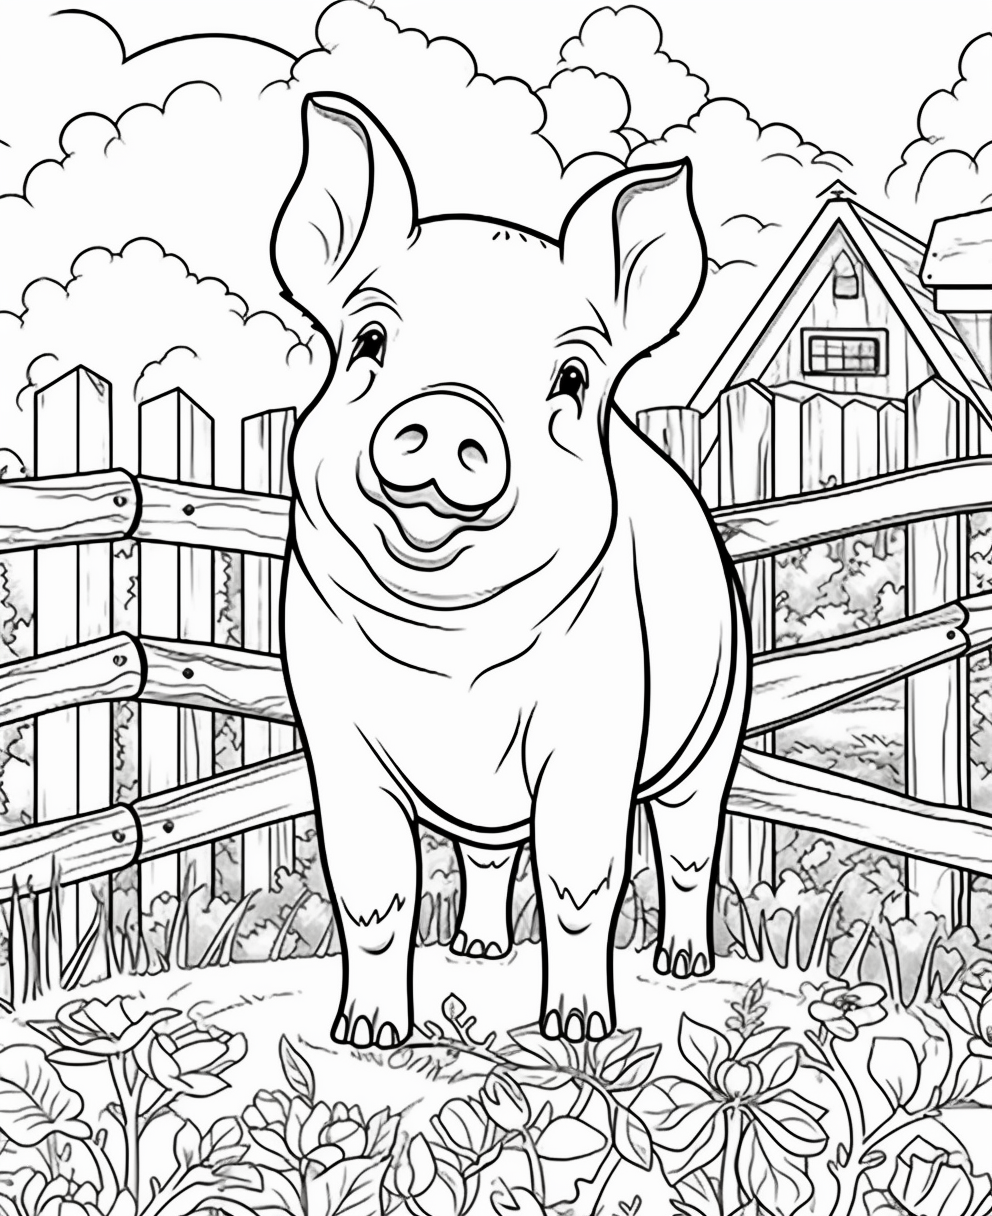 Pig coloring books for children coloring pages